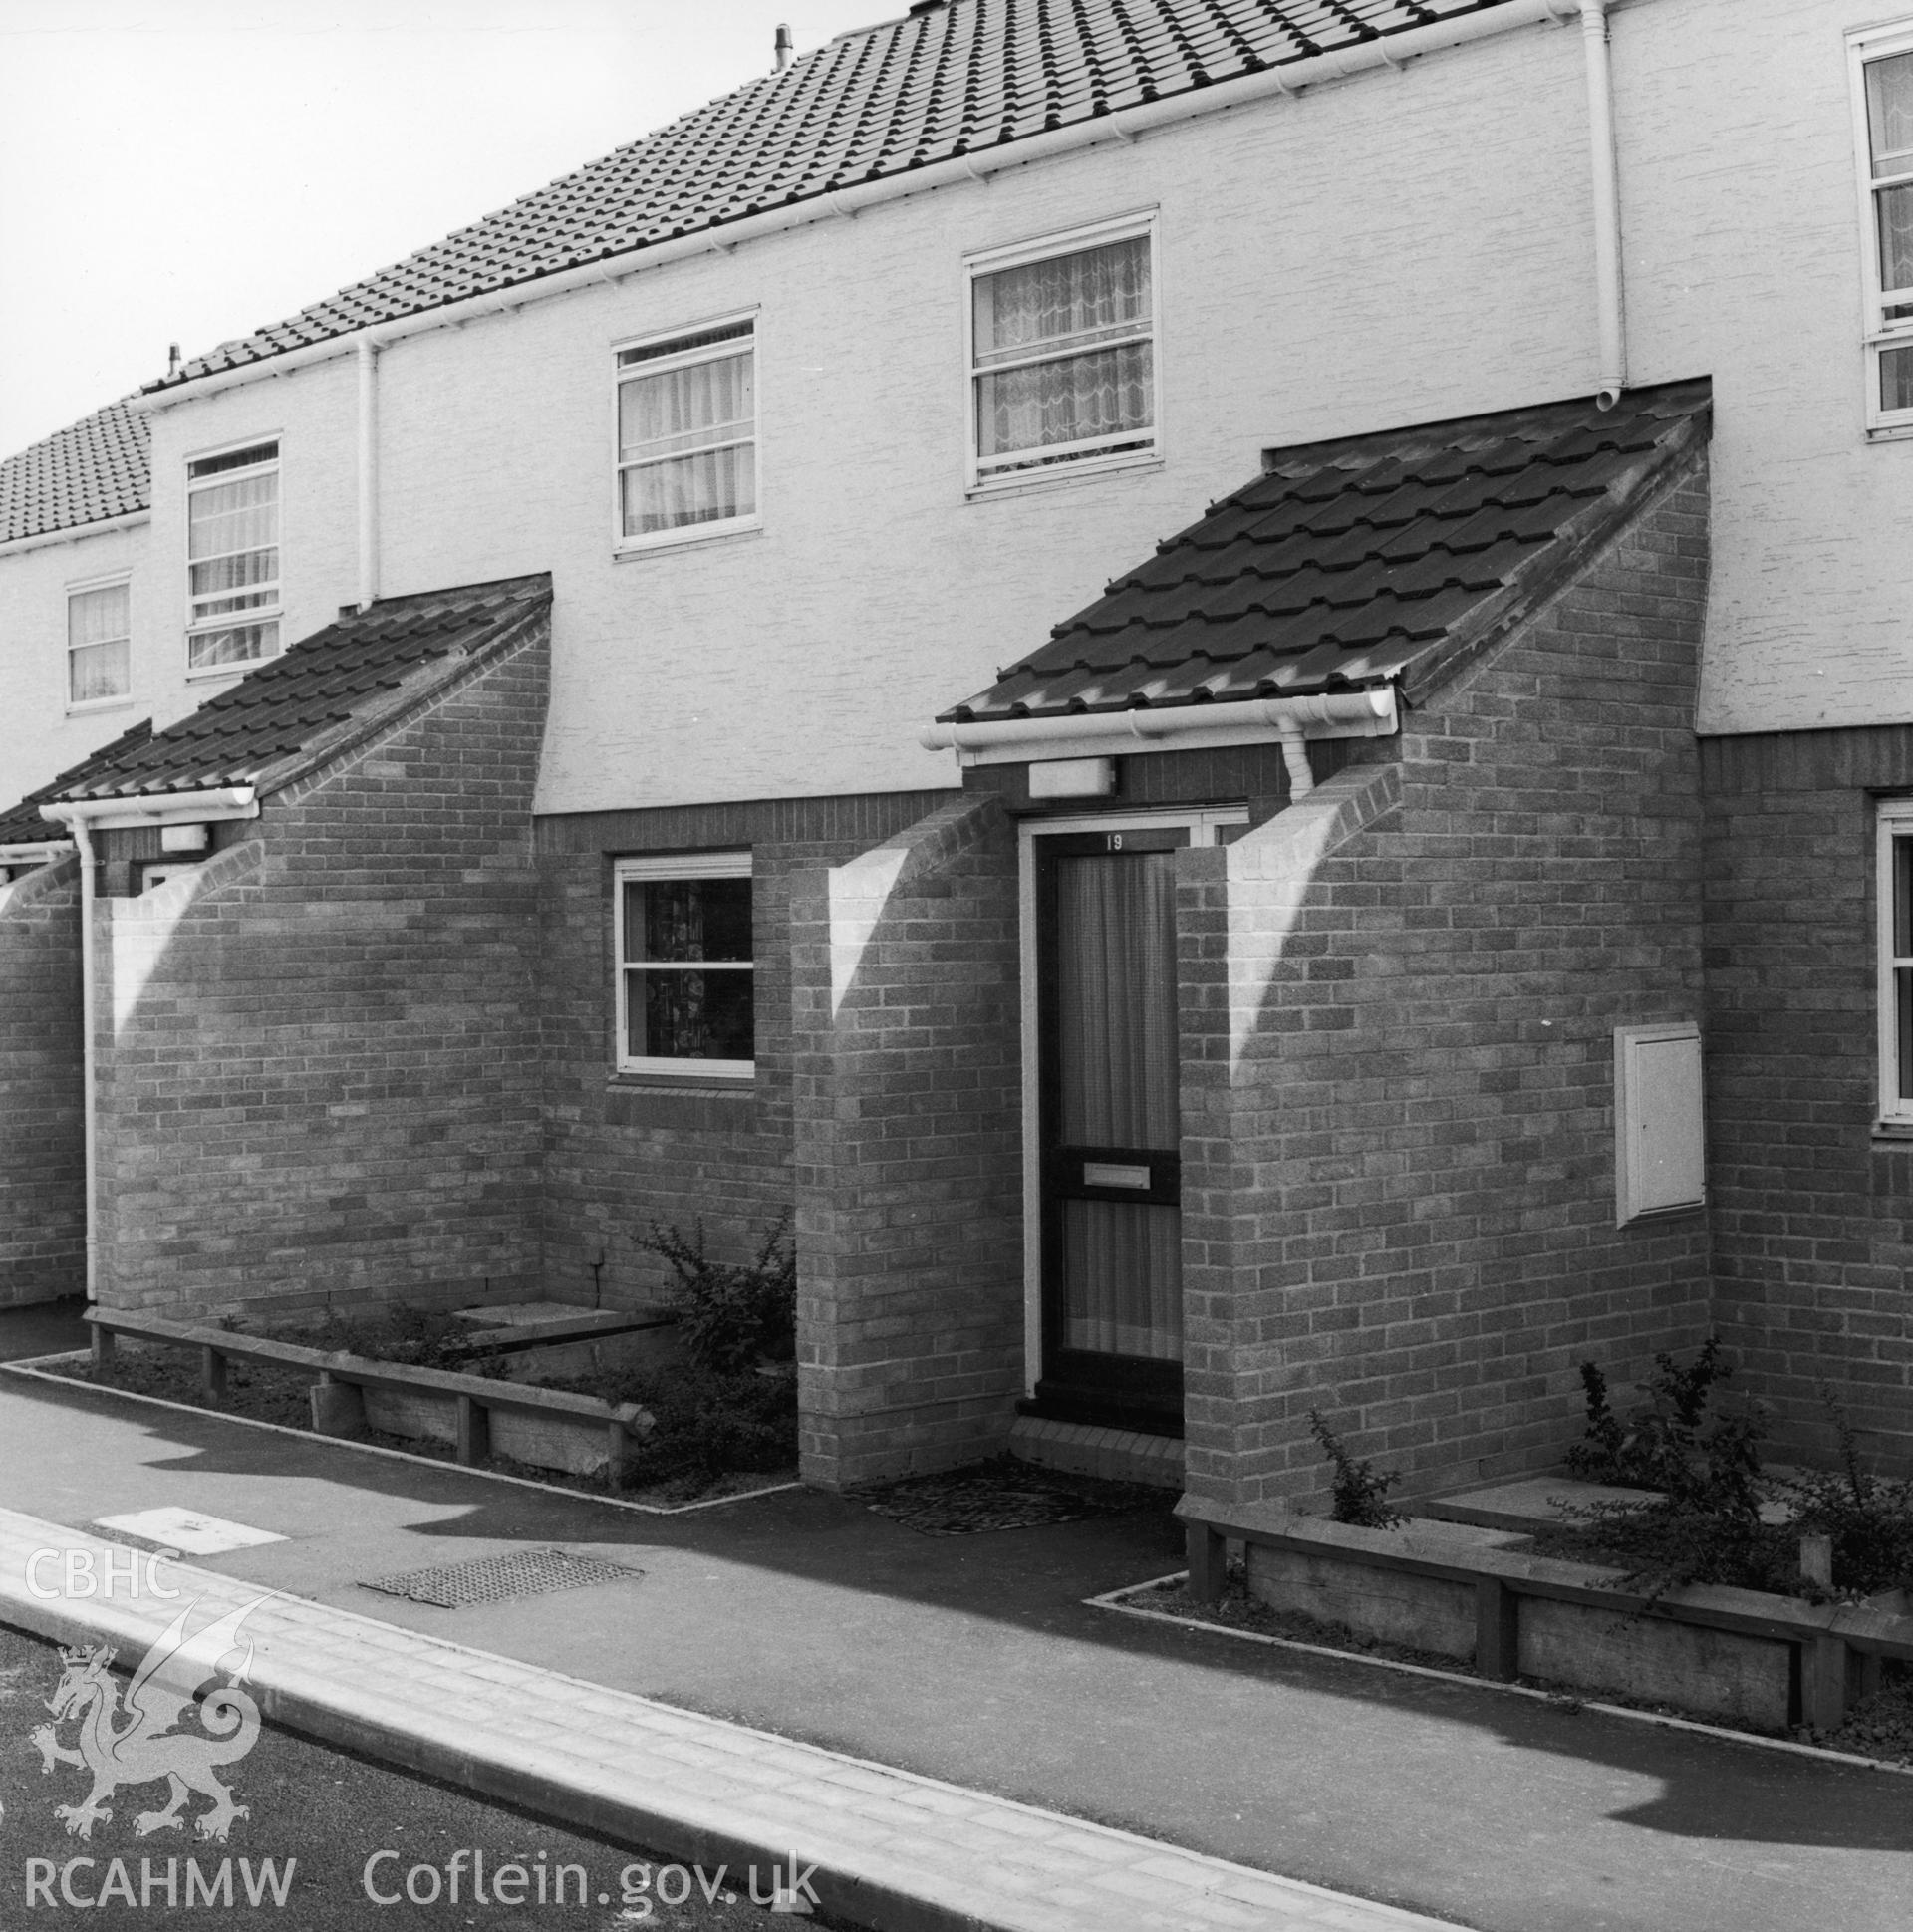 1 b/w print showing exterior view of new housing on Shaftesbury Street, Newport; collated by the former Central Office of Information.